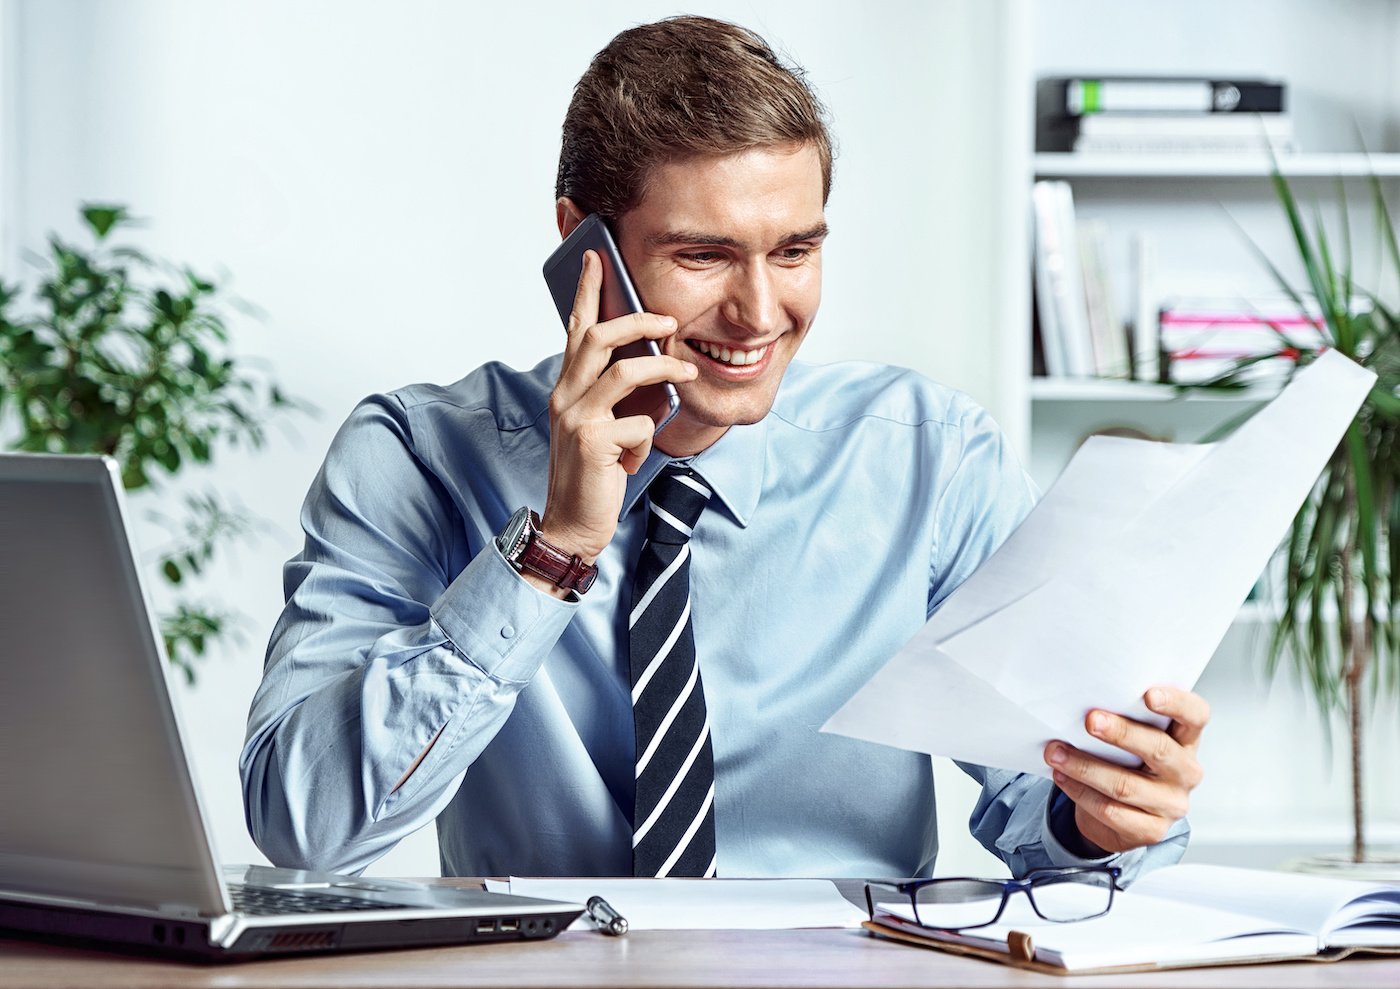 6 Ways to Leverage Sales Call Reporting to Close More Deals (+ Templates)